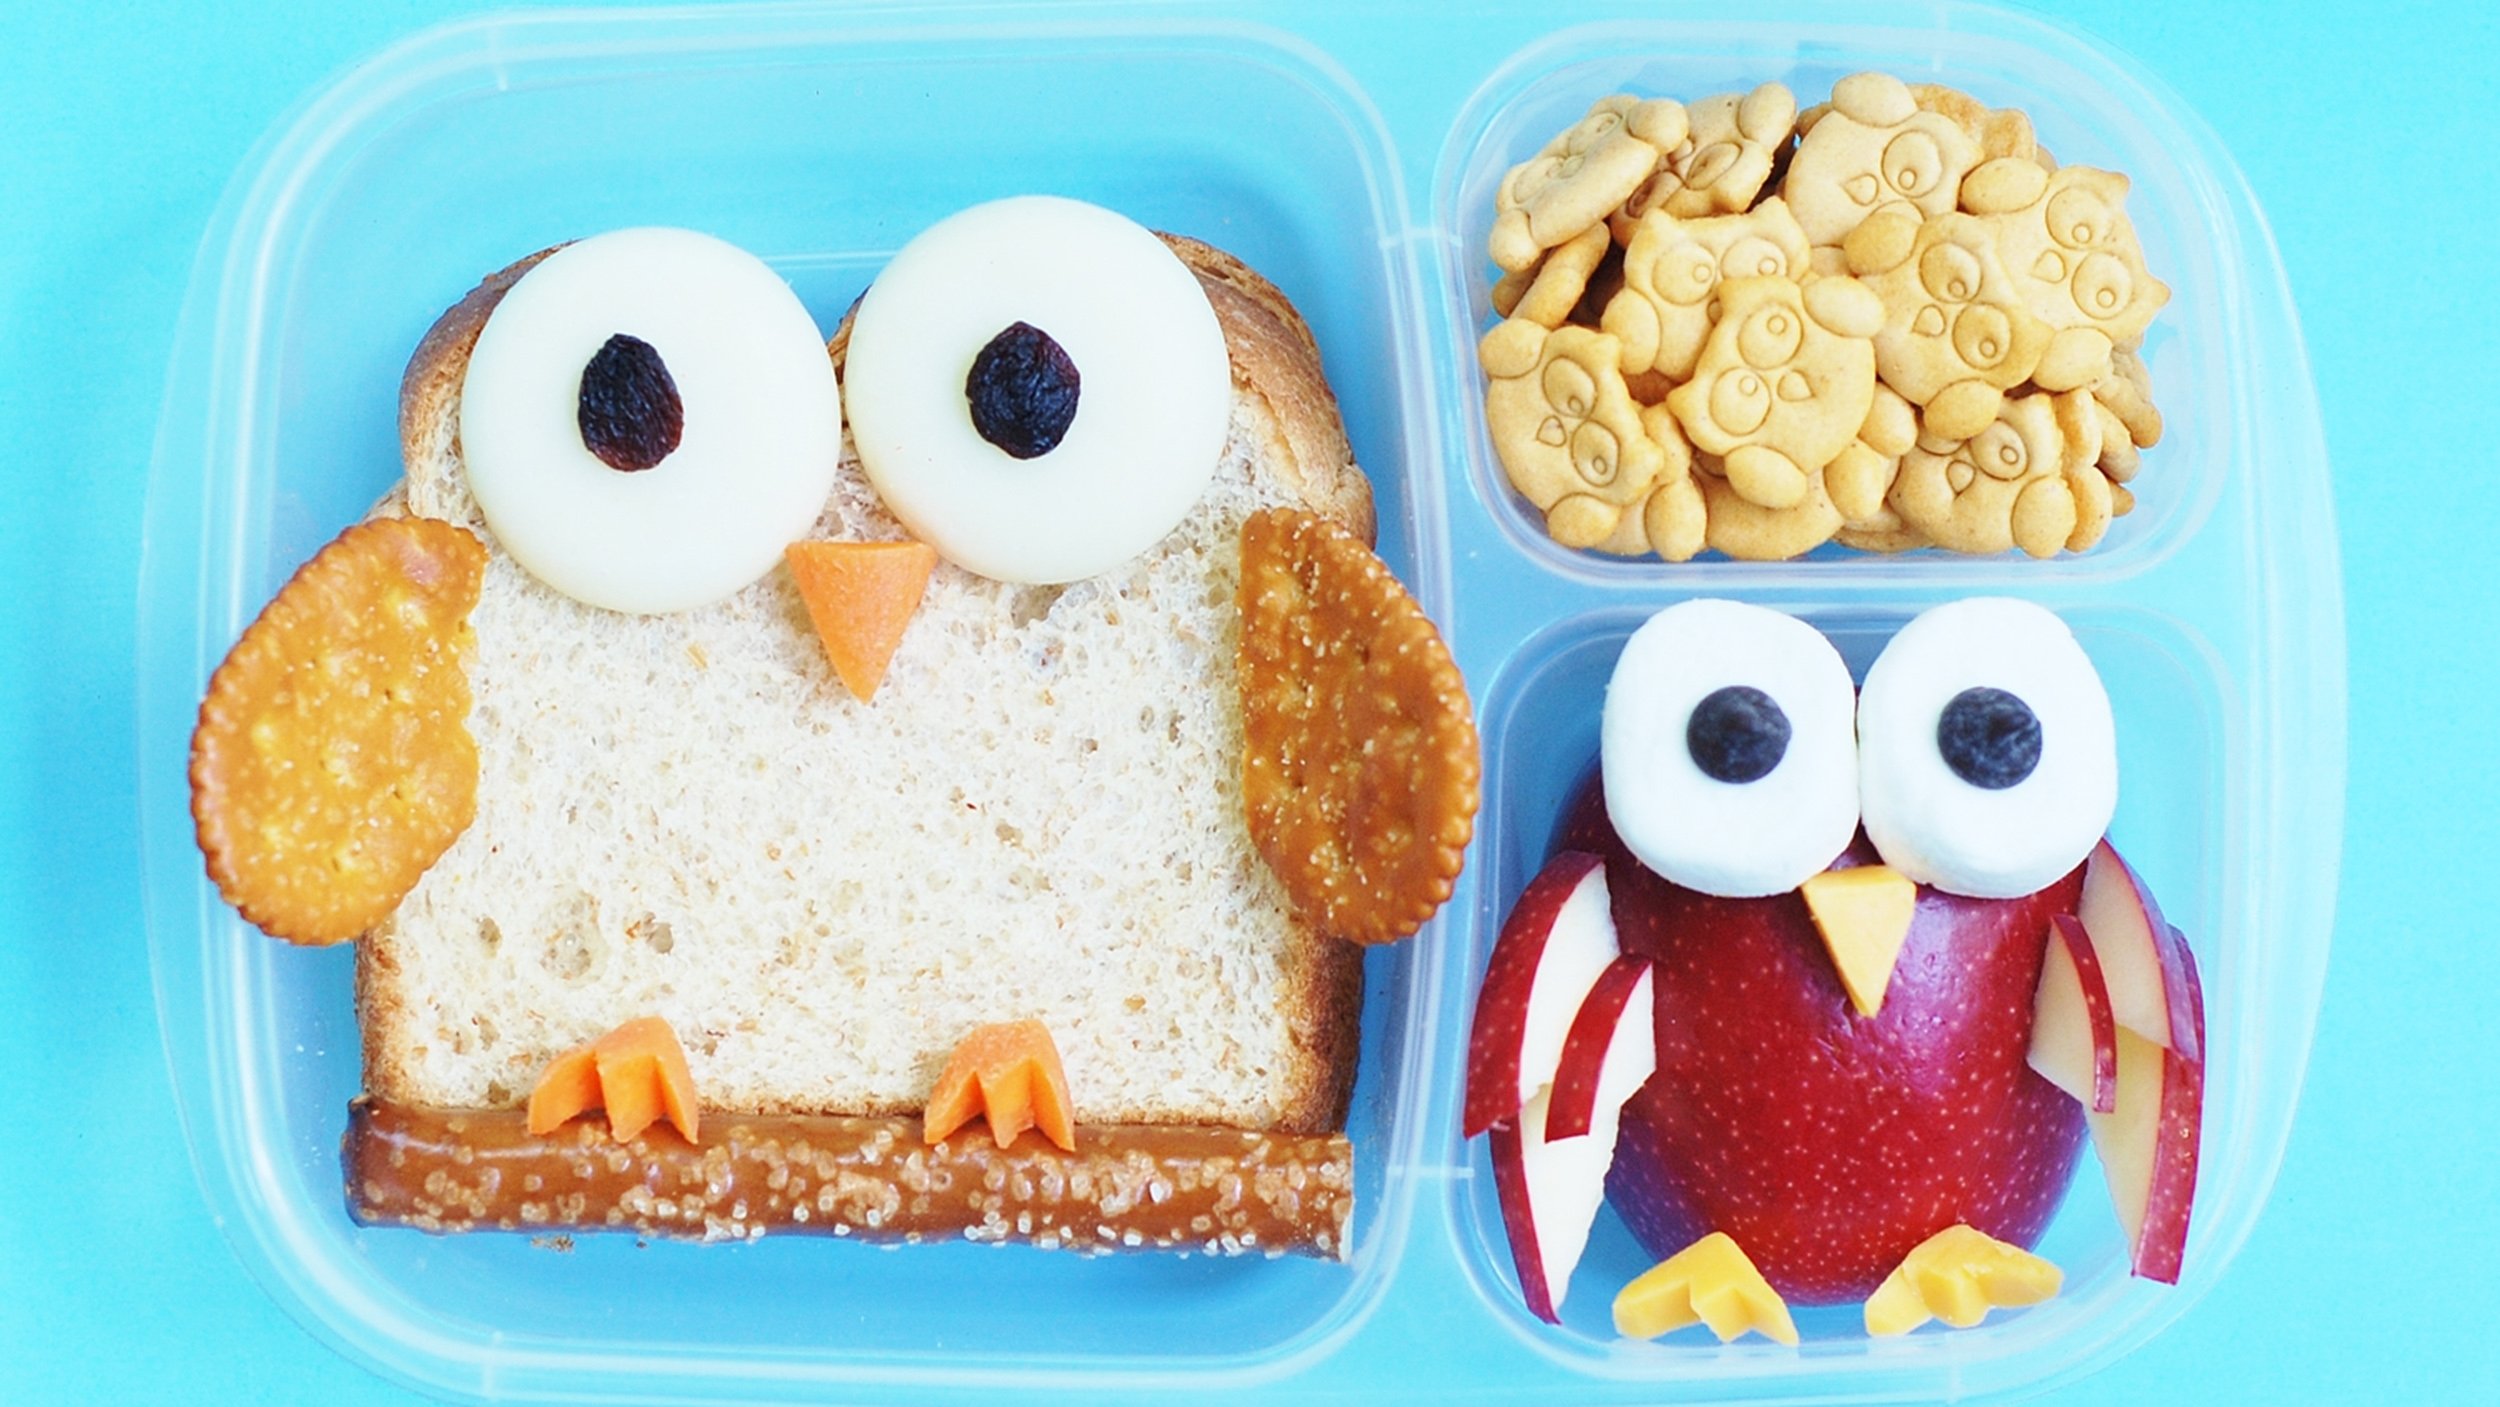 10 Cute Cute Snack Ideas For Kids 5 cute and creative bento box lunch ideas for kids today 2 2022